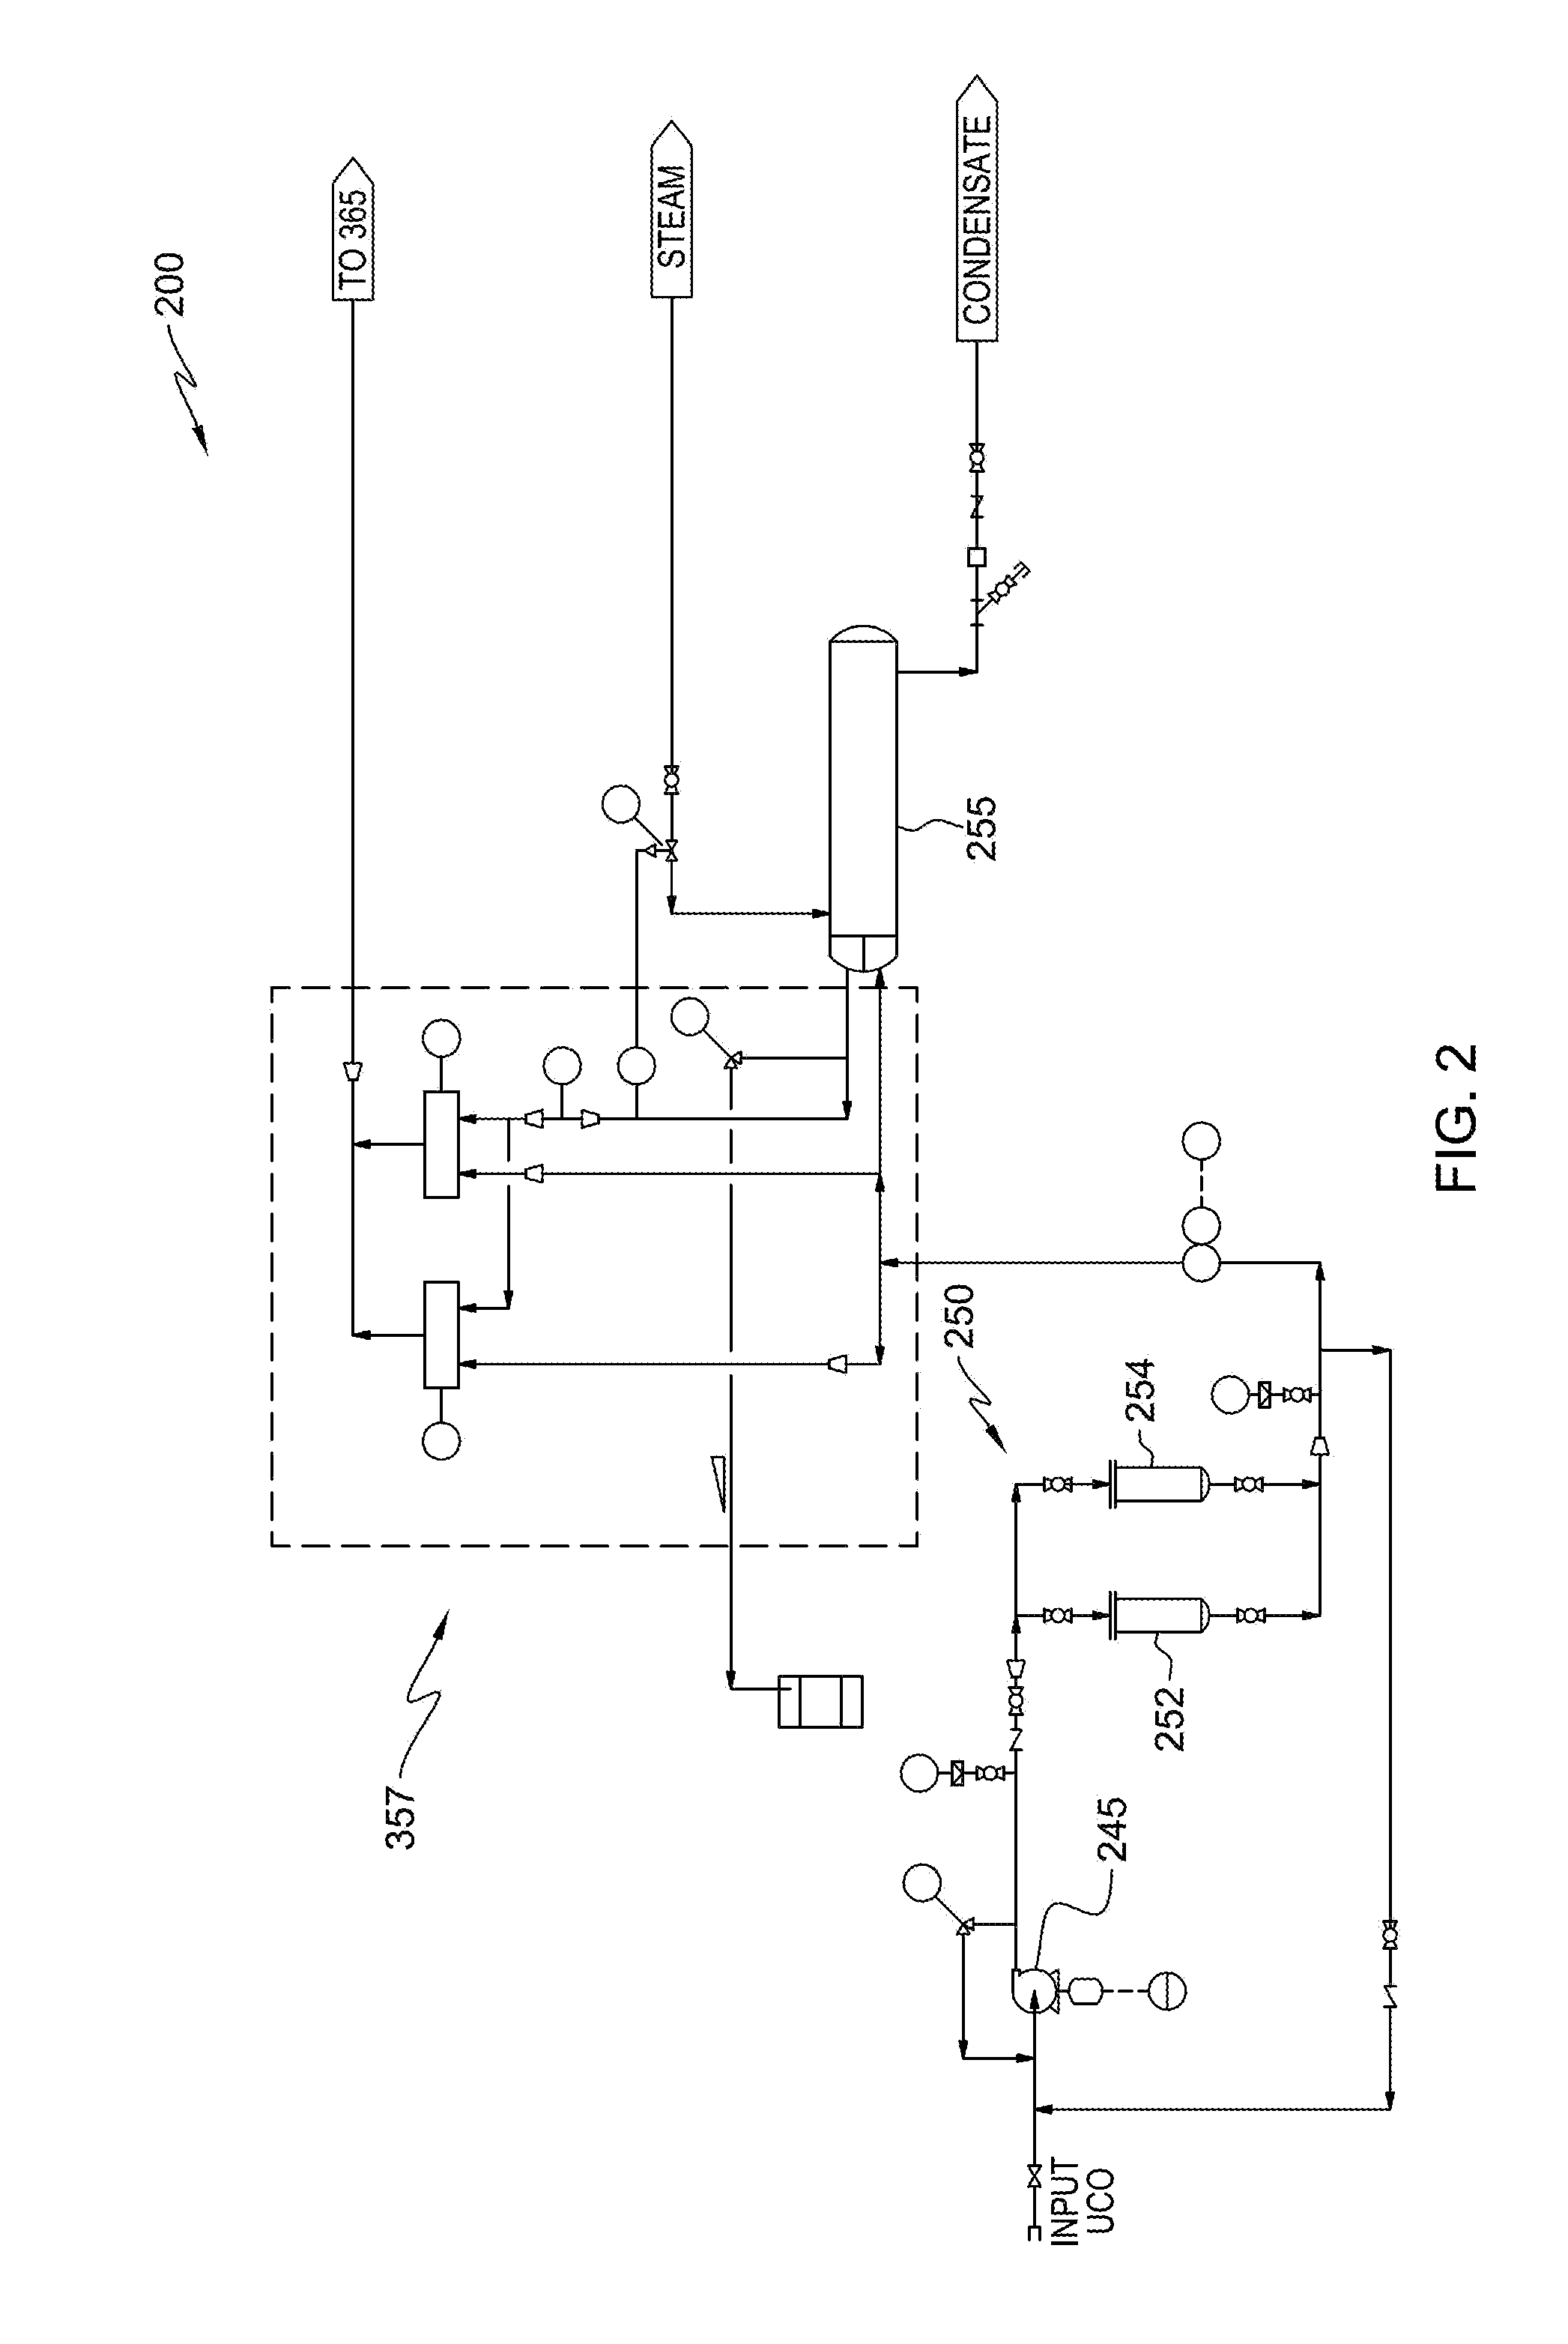 Method and system for processing used cooking oil